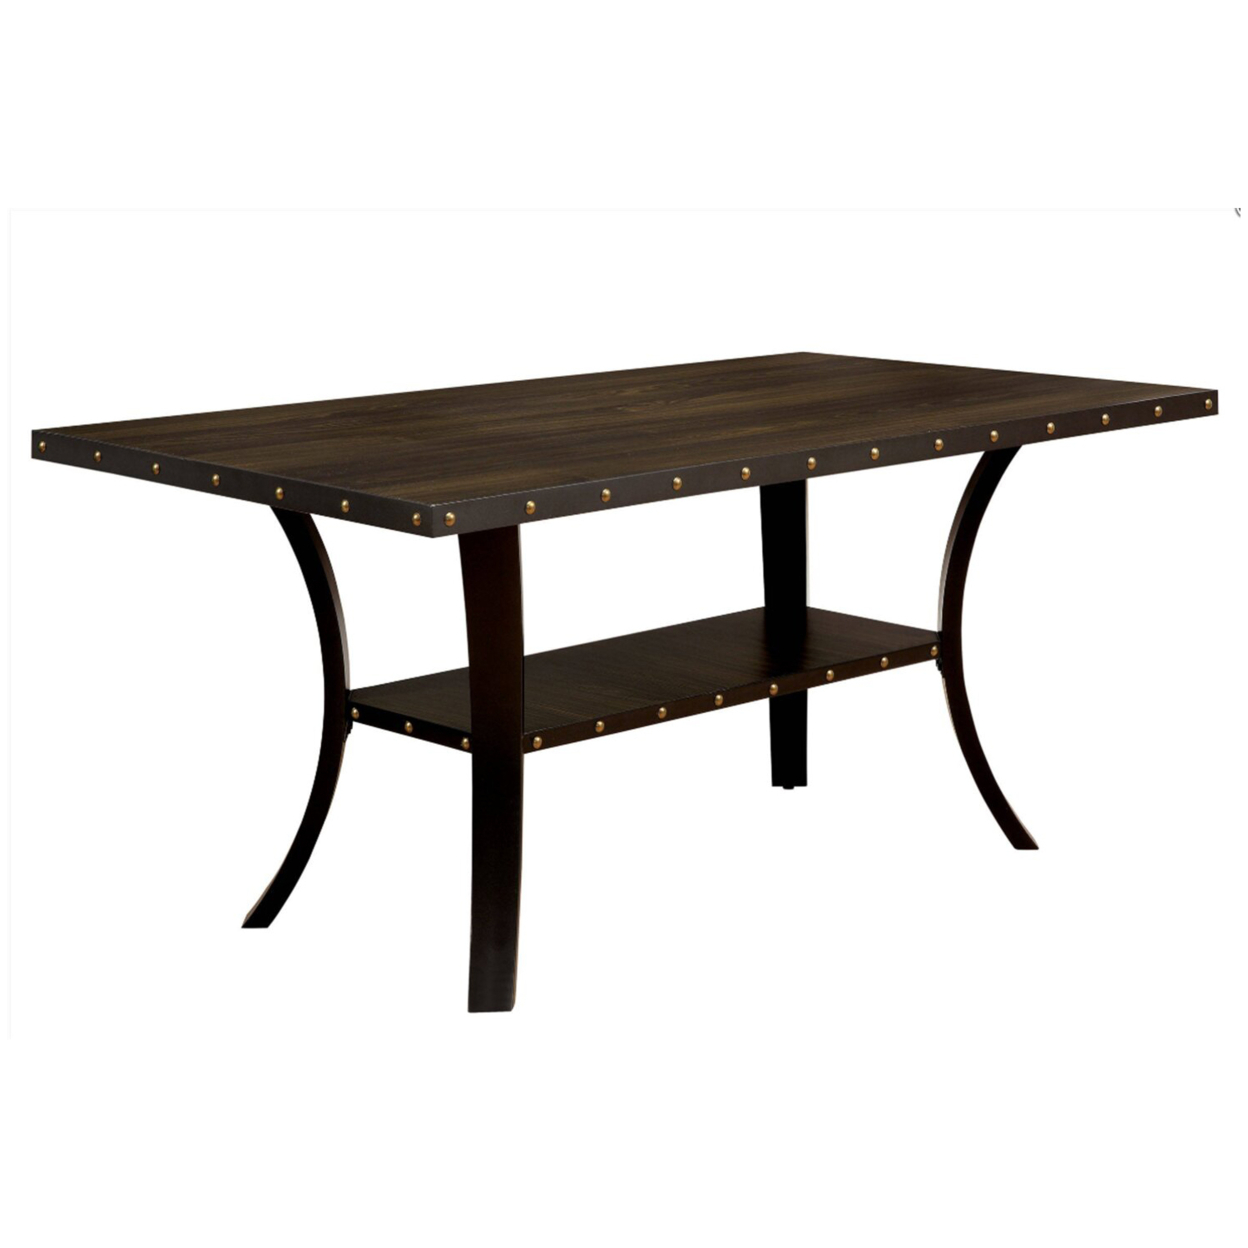 Transitional Wooden Dining Table With Nailhead Trim And Open Shelf, Brown- Saltoro Sherpi